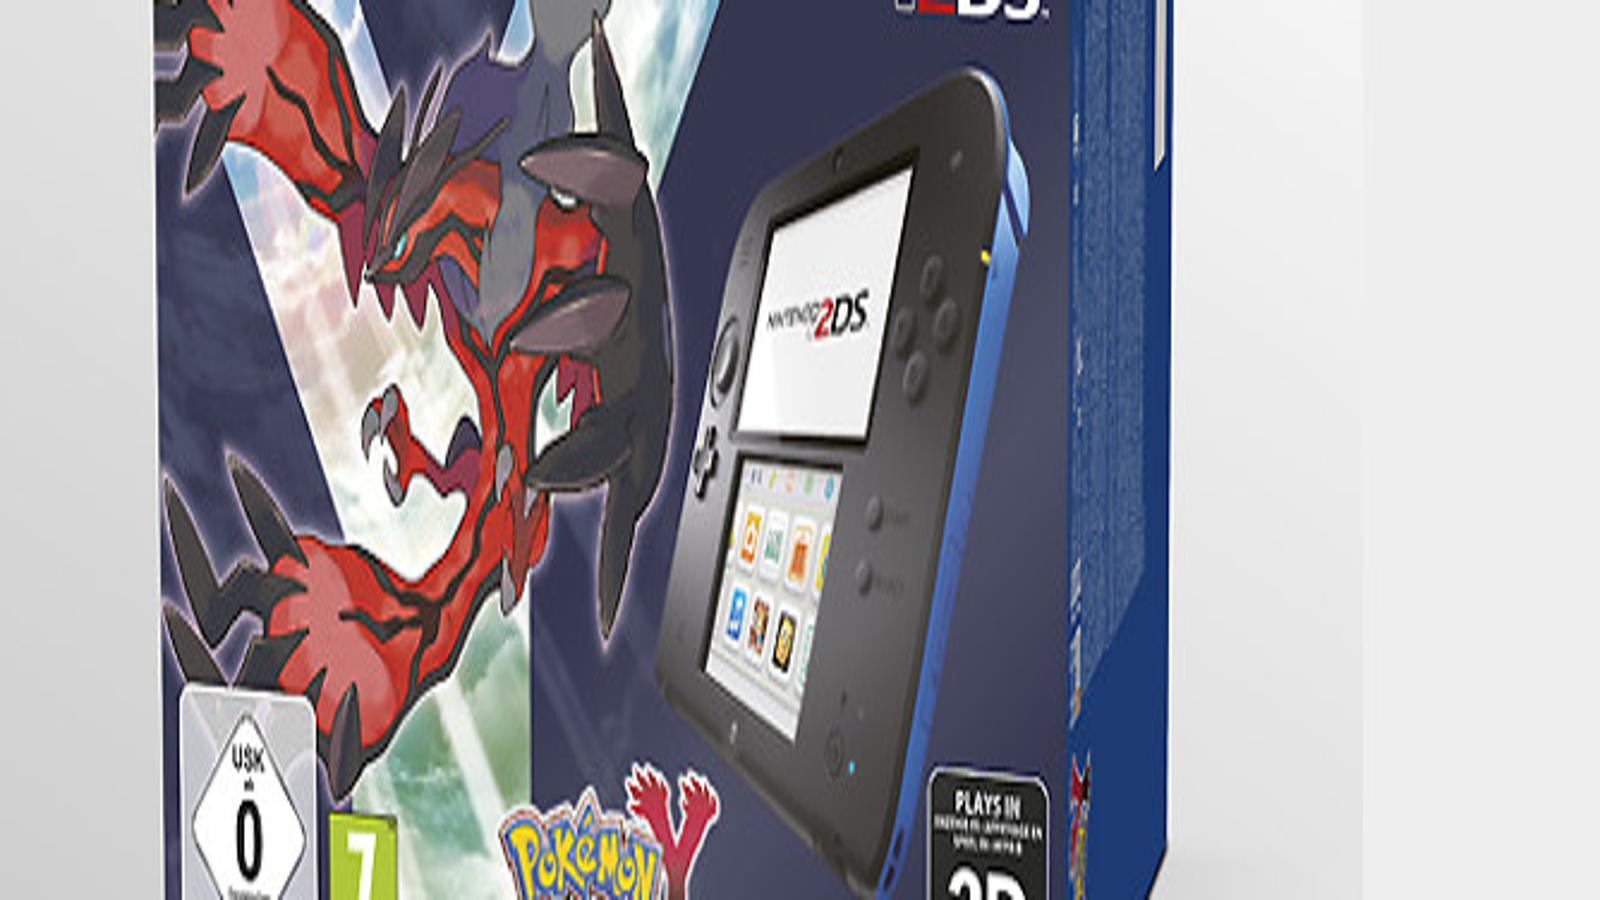 X 2DS & Europe Pokemon bundles | Y VG247 spotted in